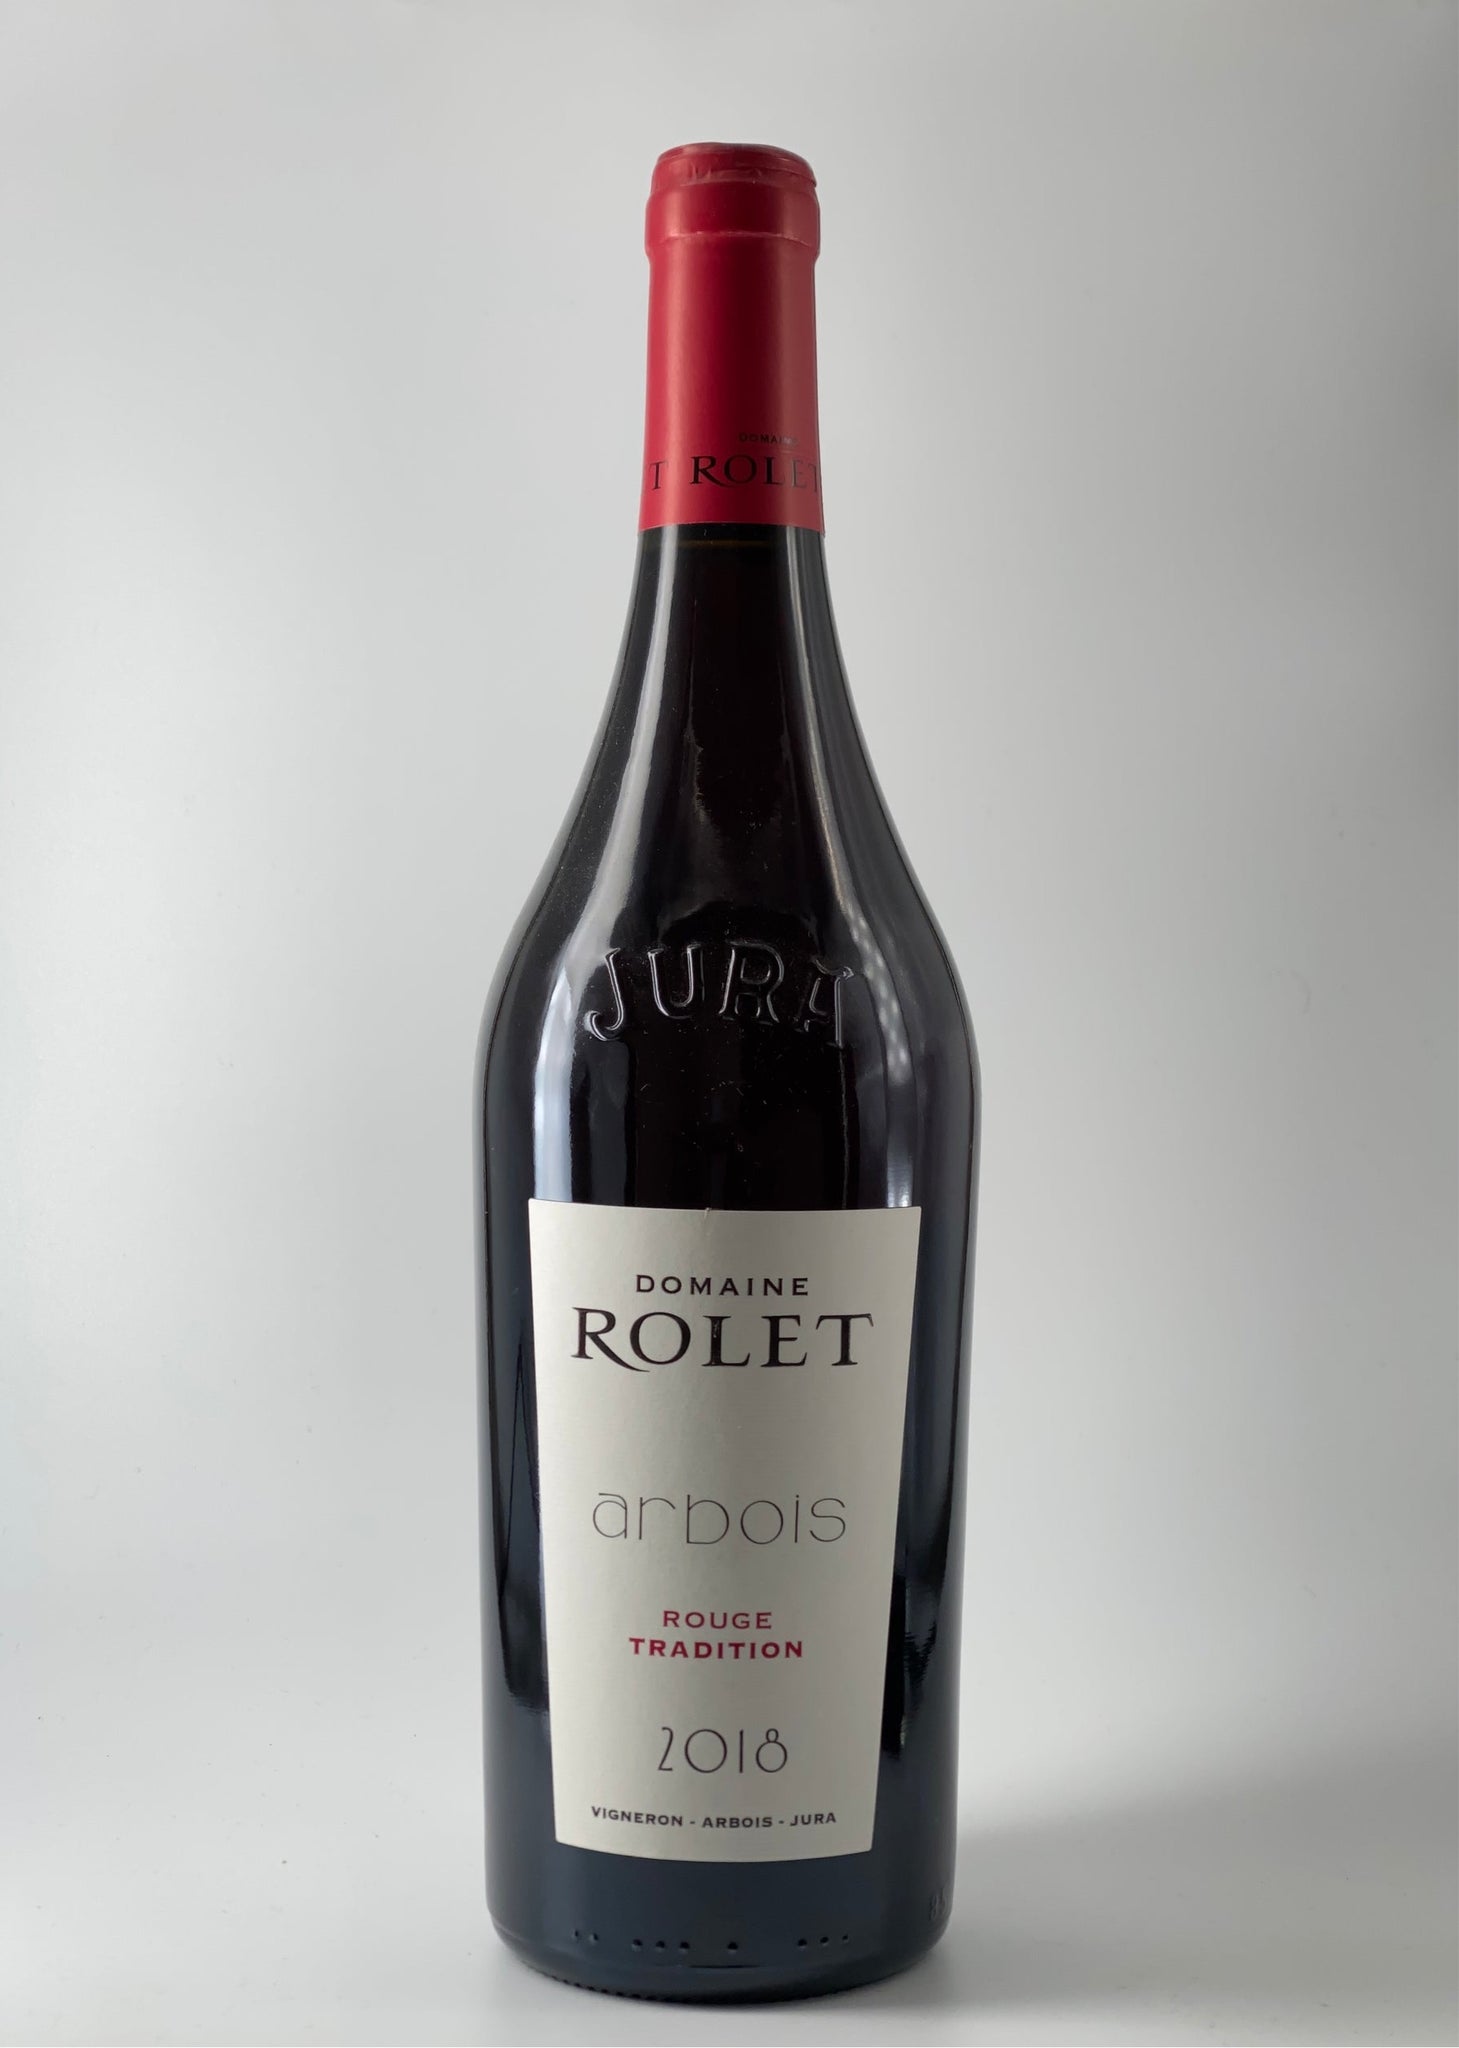 Jura, Arbois Rouge, Domaine Rolet Tradition